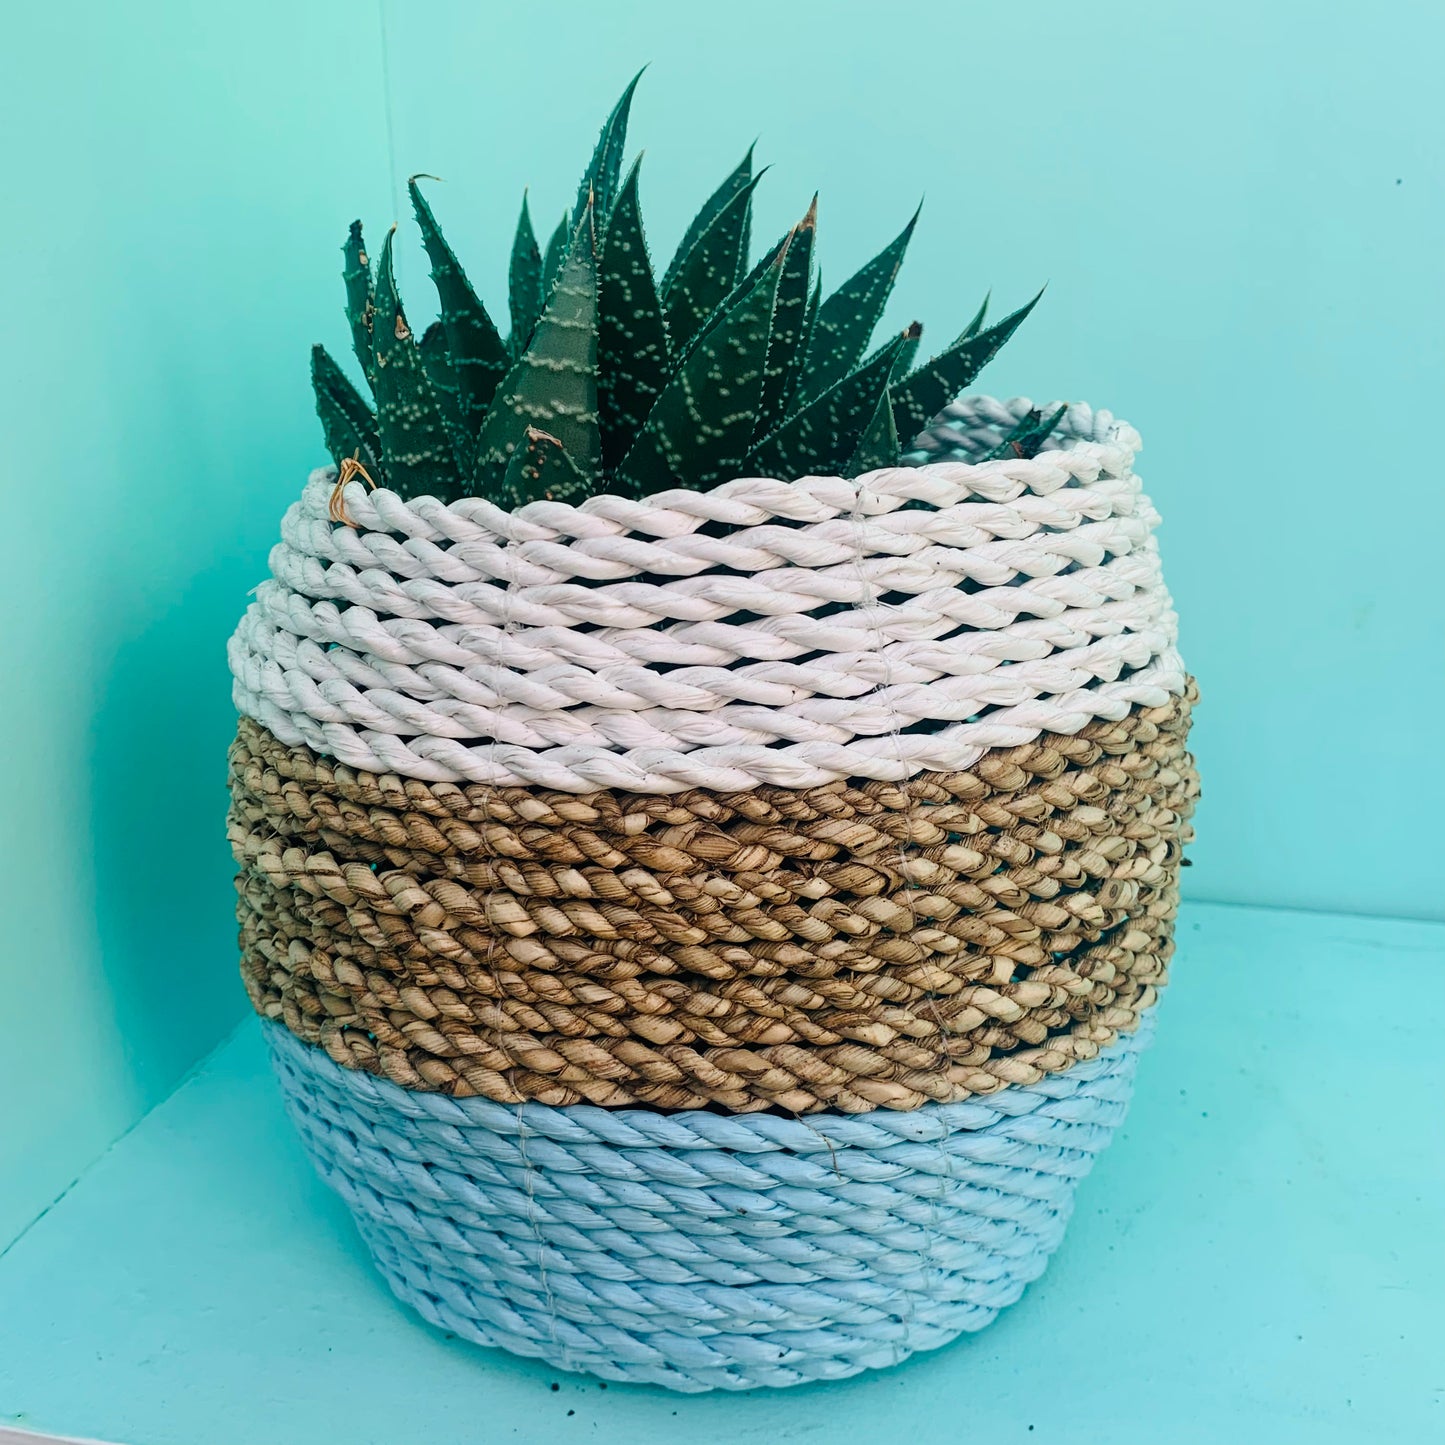 Basket straw colors